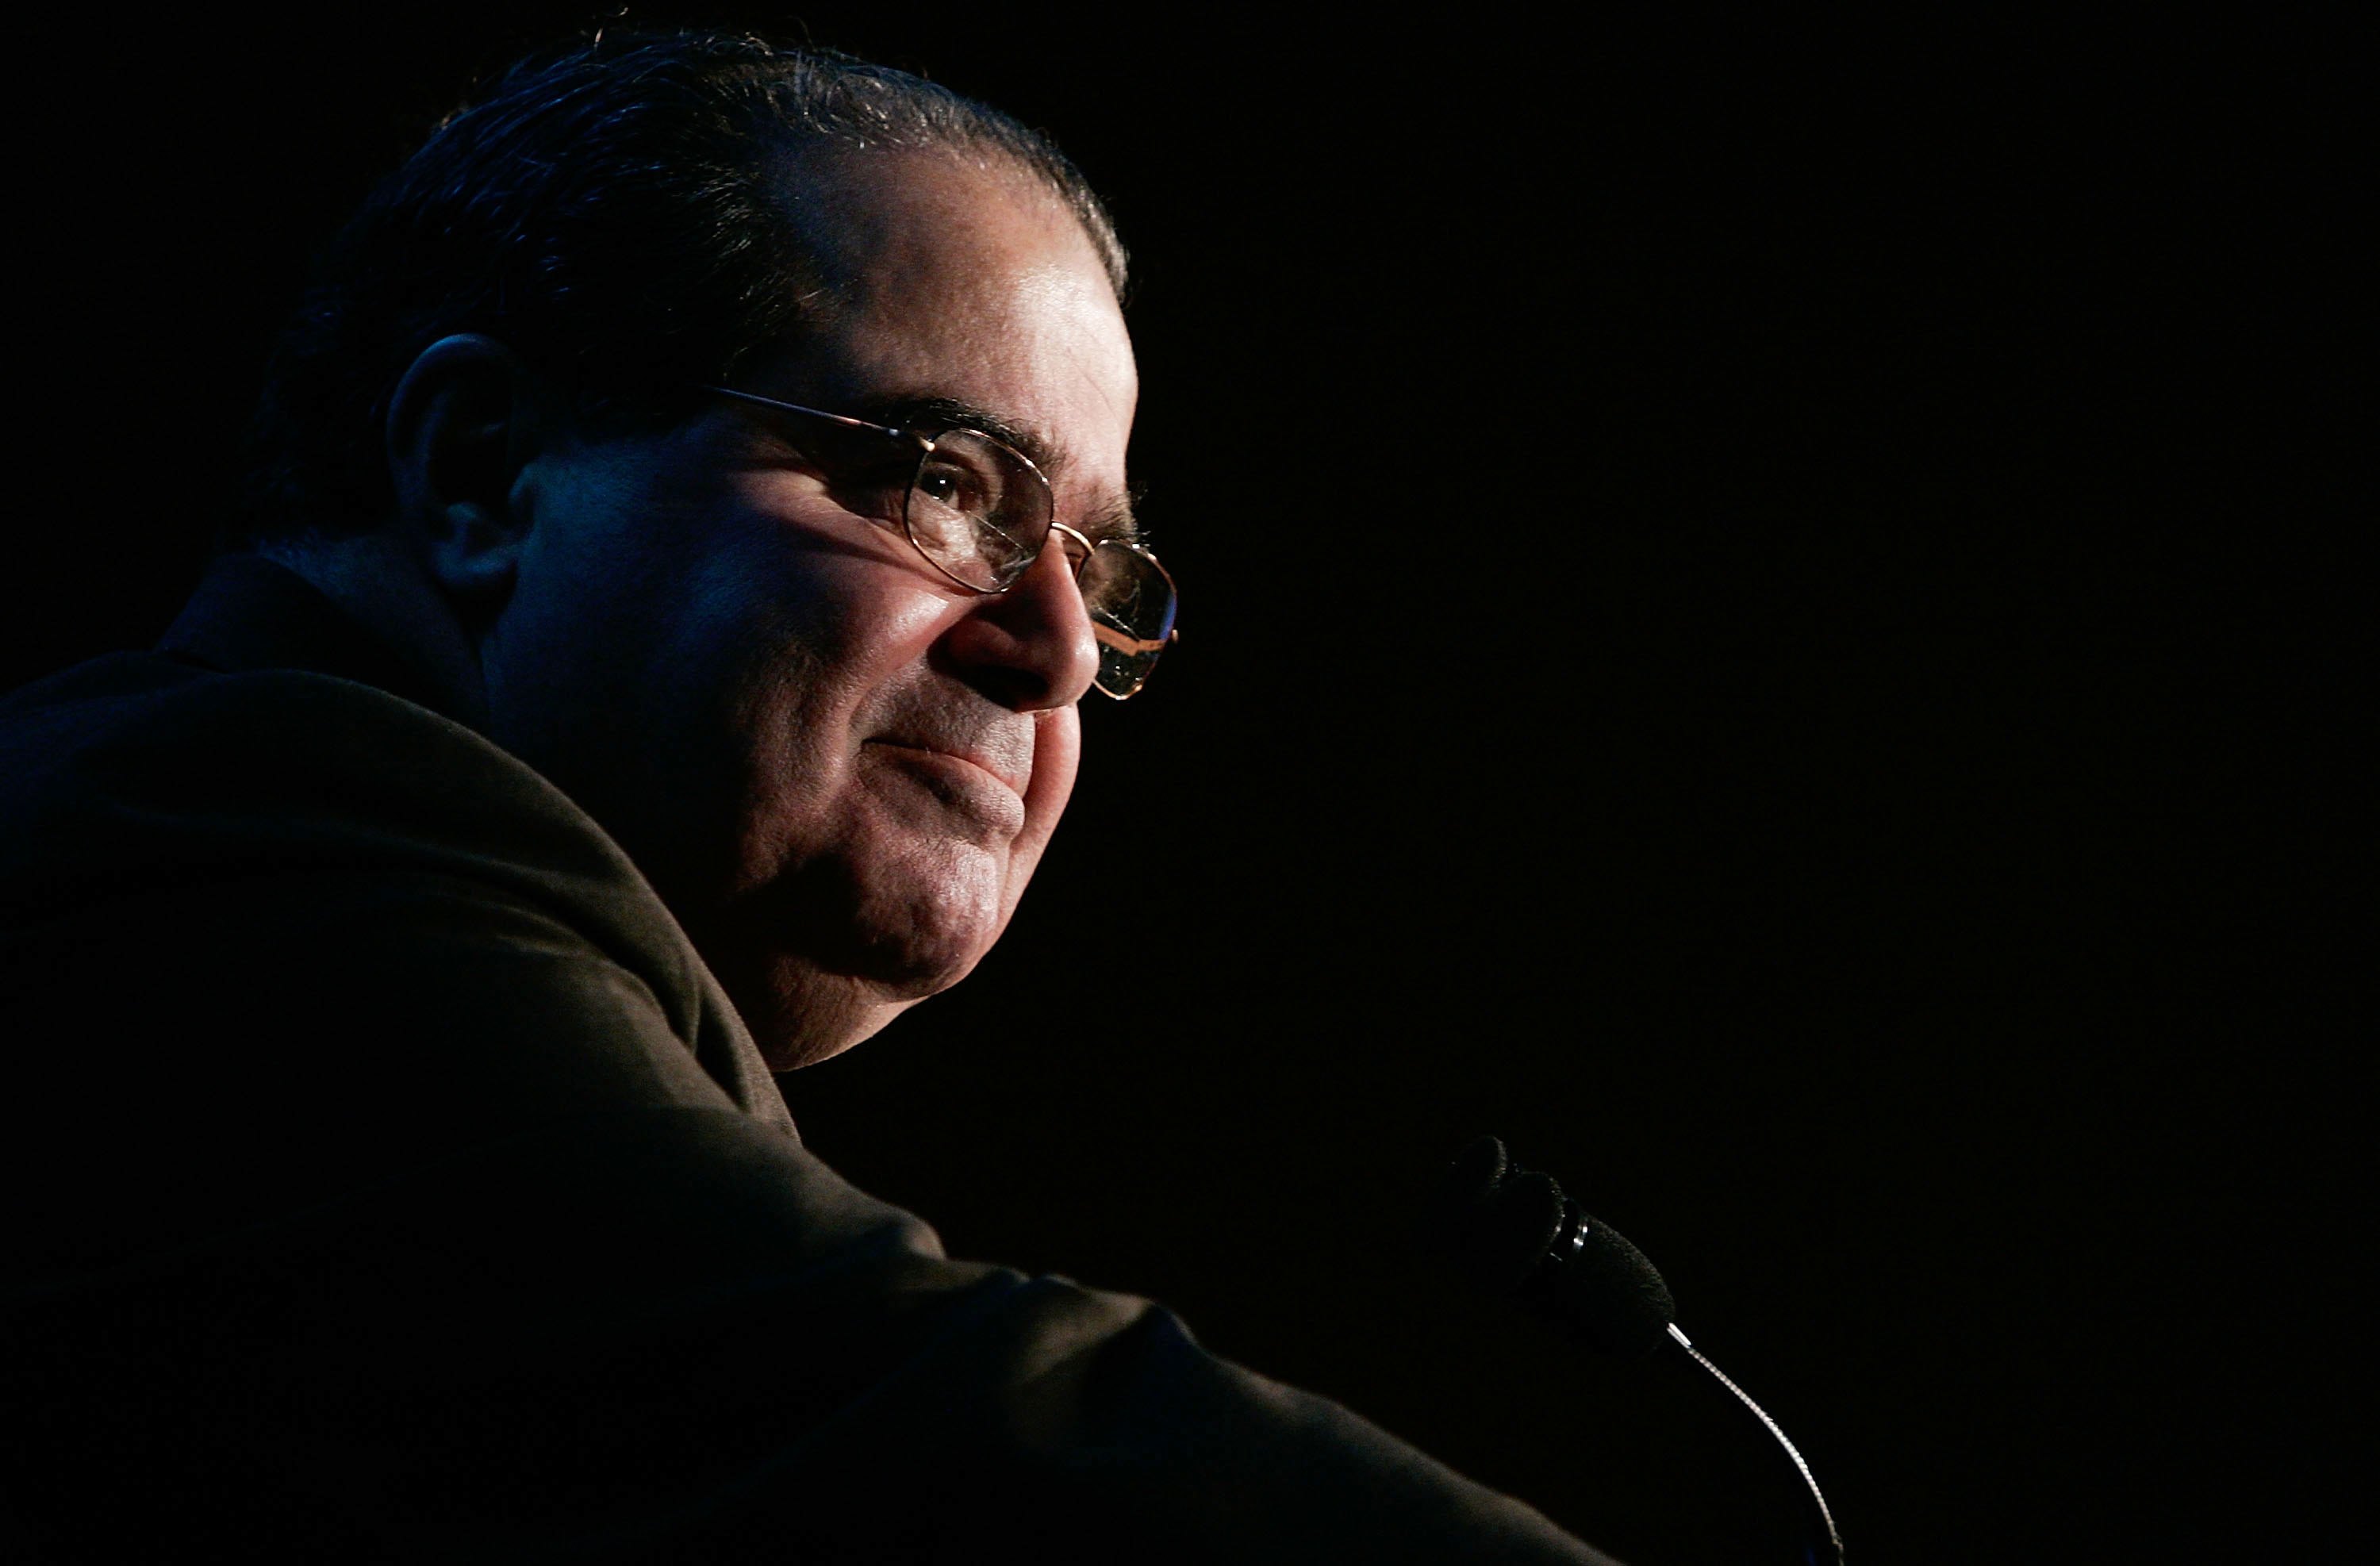 This Dec. 13, 2006 photo shows Supreme Court Associate Justice Antonin Scalia during an address at a Northern Virginia Technology Council (NVTC) breakfast in McLean, Va. (Alex Wong—Getty Images)